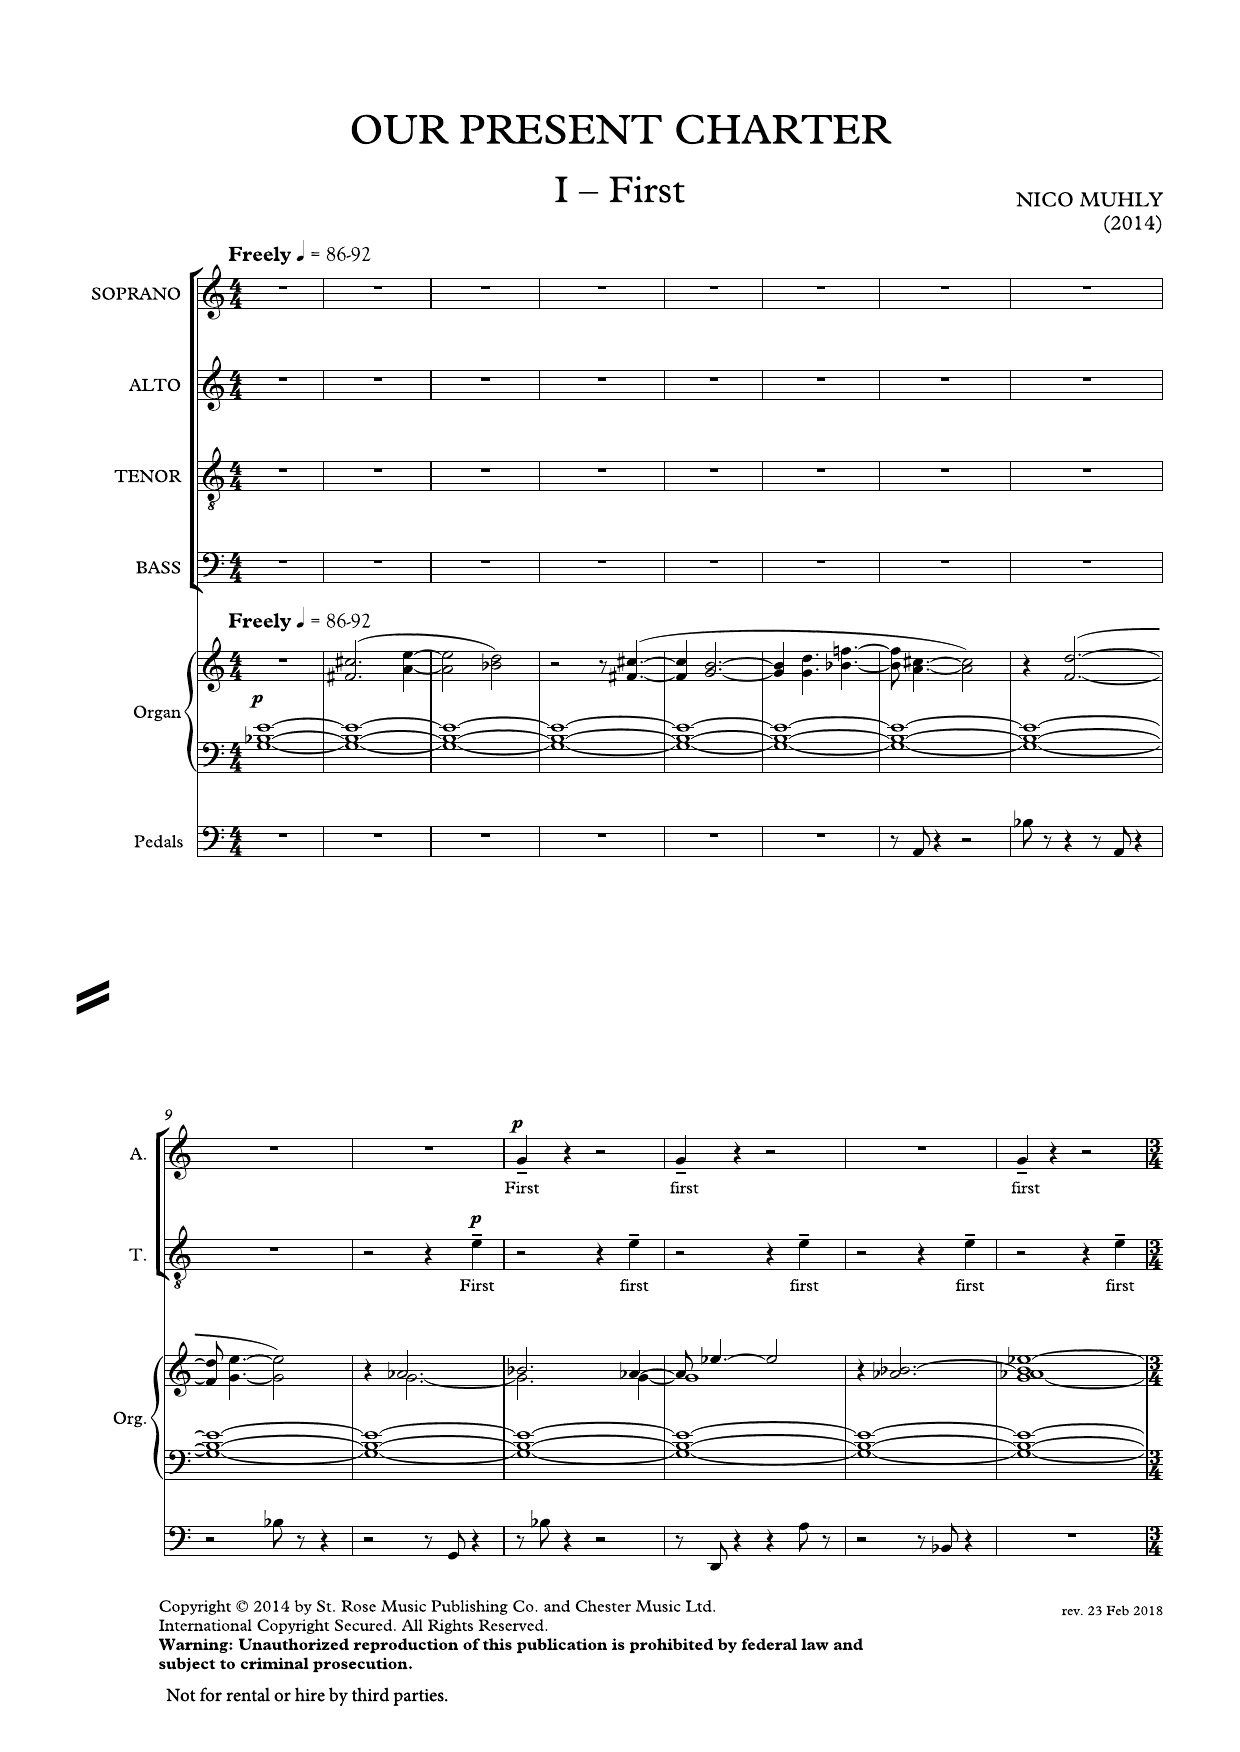 Download Nico Muhly Our Present Charter Sheet Music